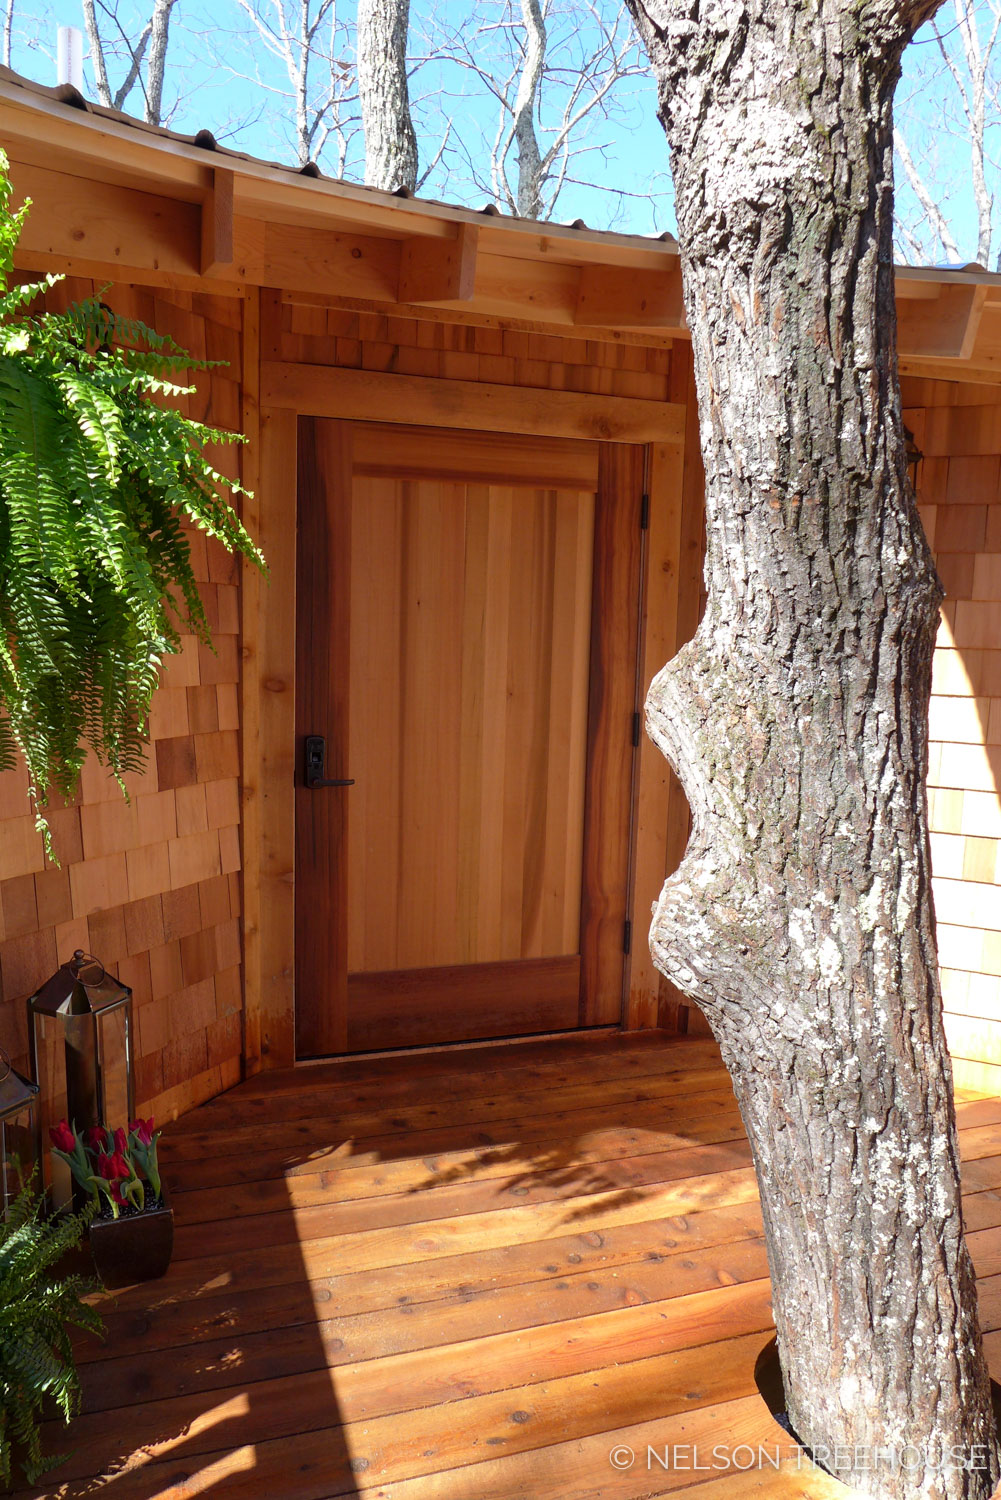  Super Spy Treehouse - Nelson Treehouse 2018 - Front door 